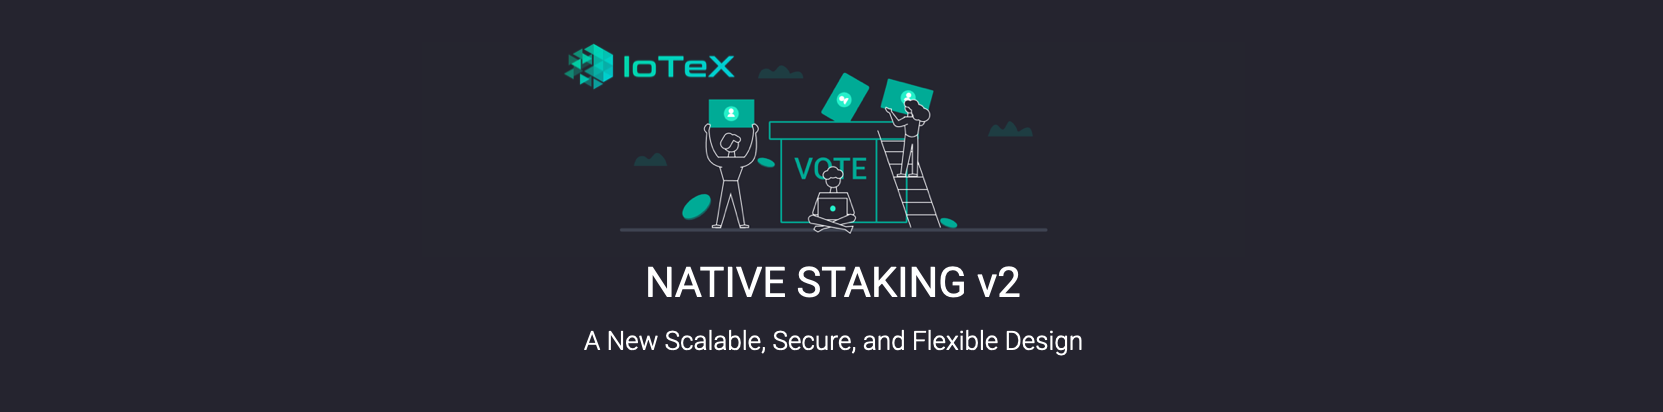 IoTeX Native Staking v2 — A New Scalable, Secure, and Flexible Design